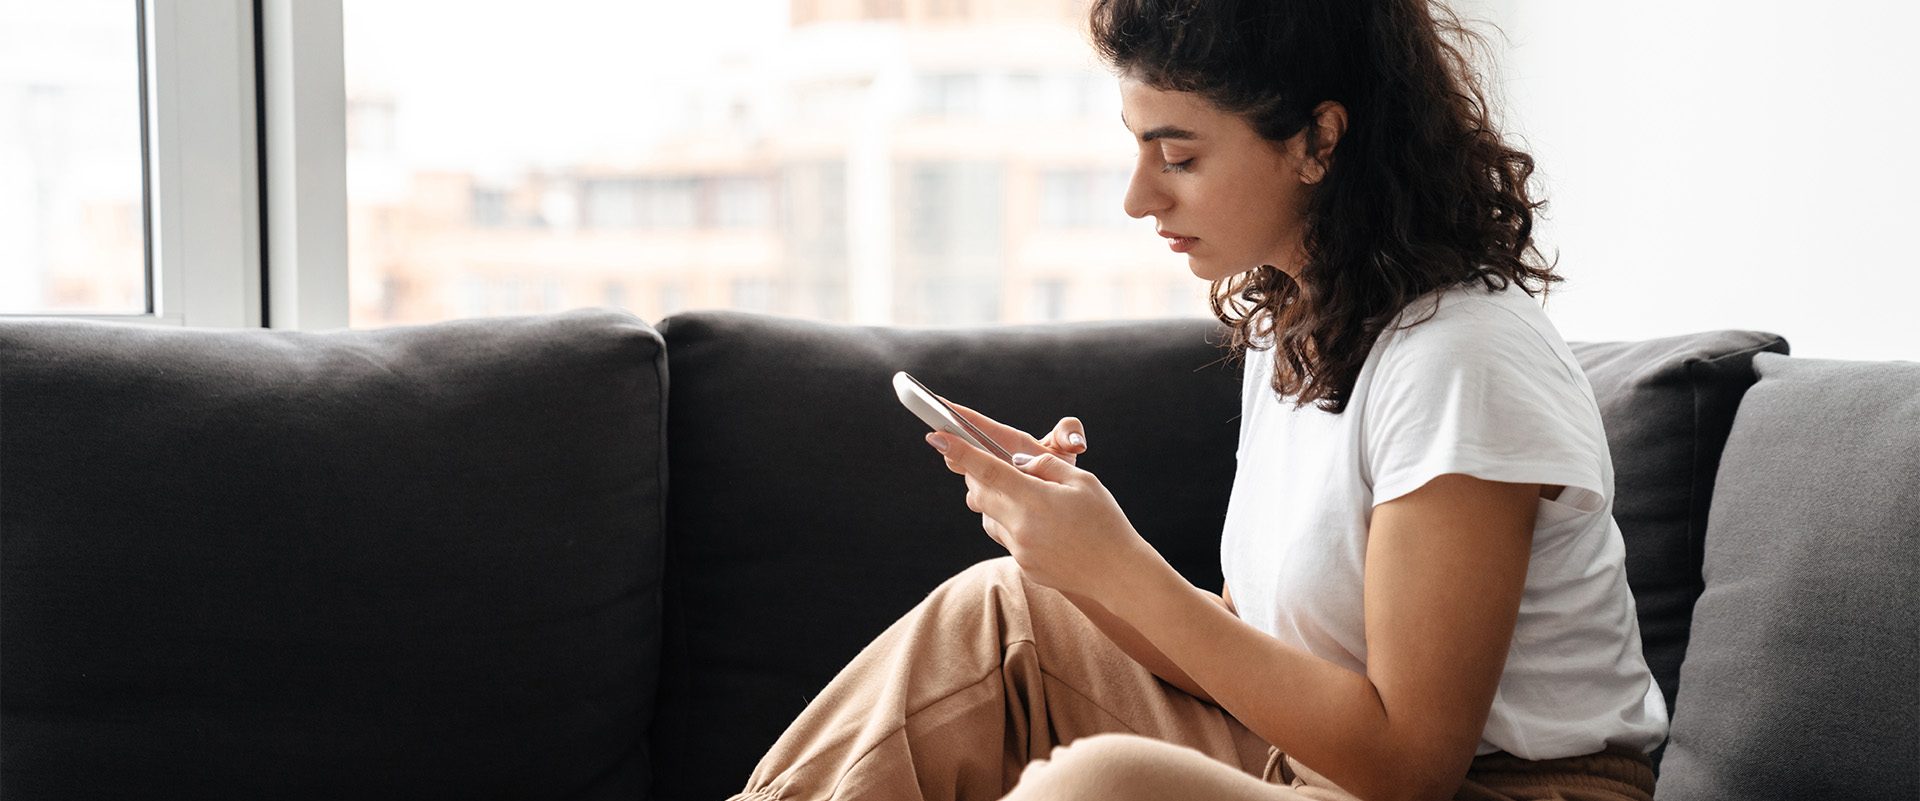 Focused brunette young woman using mobile phone while sitting on sofa